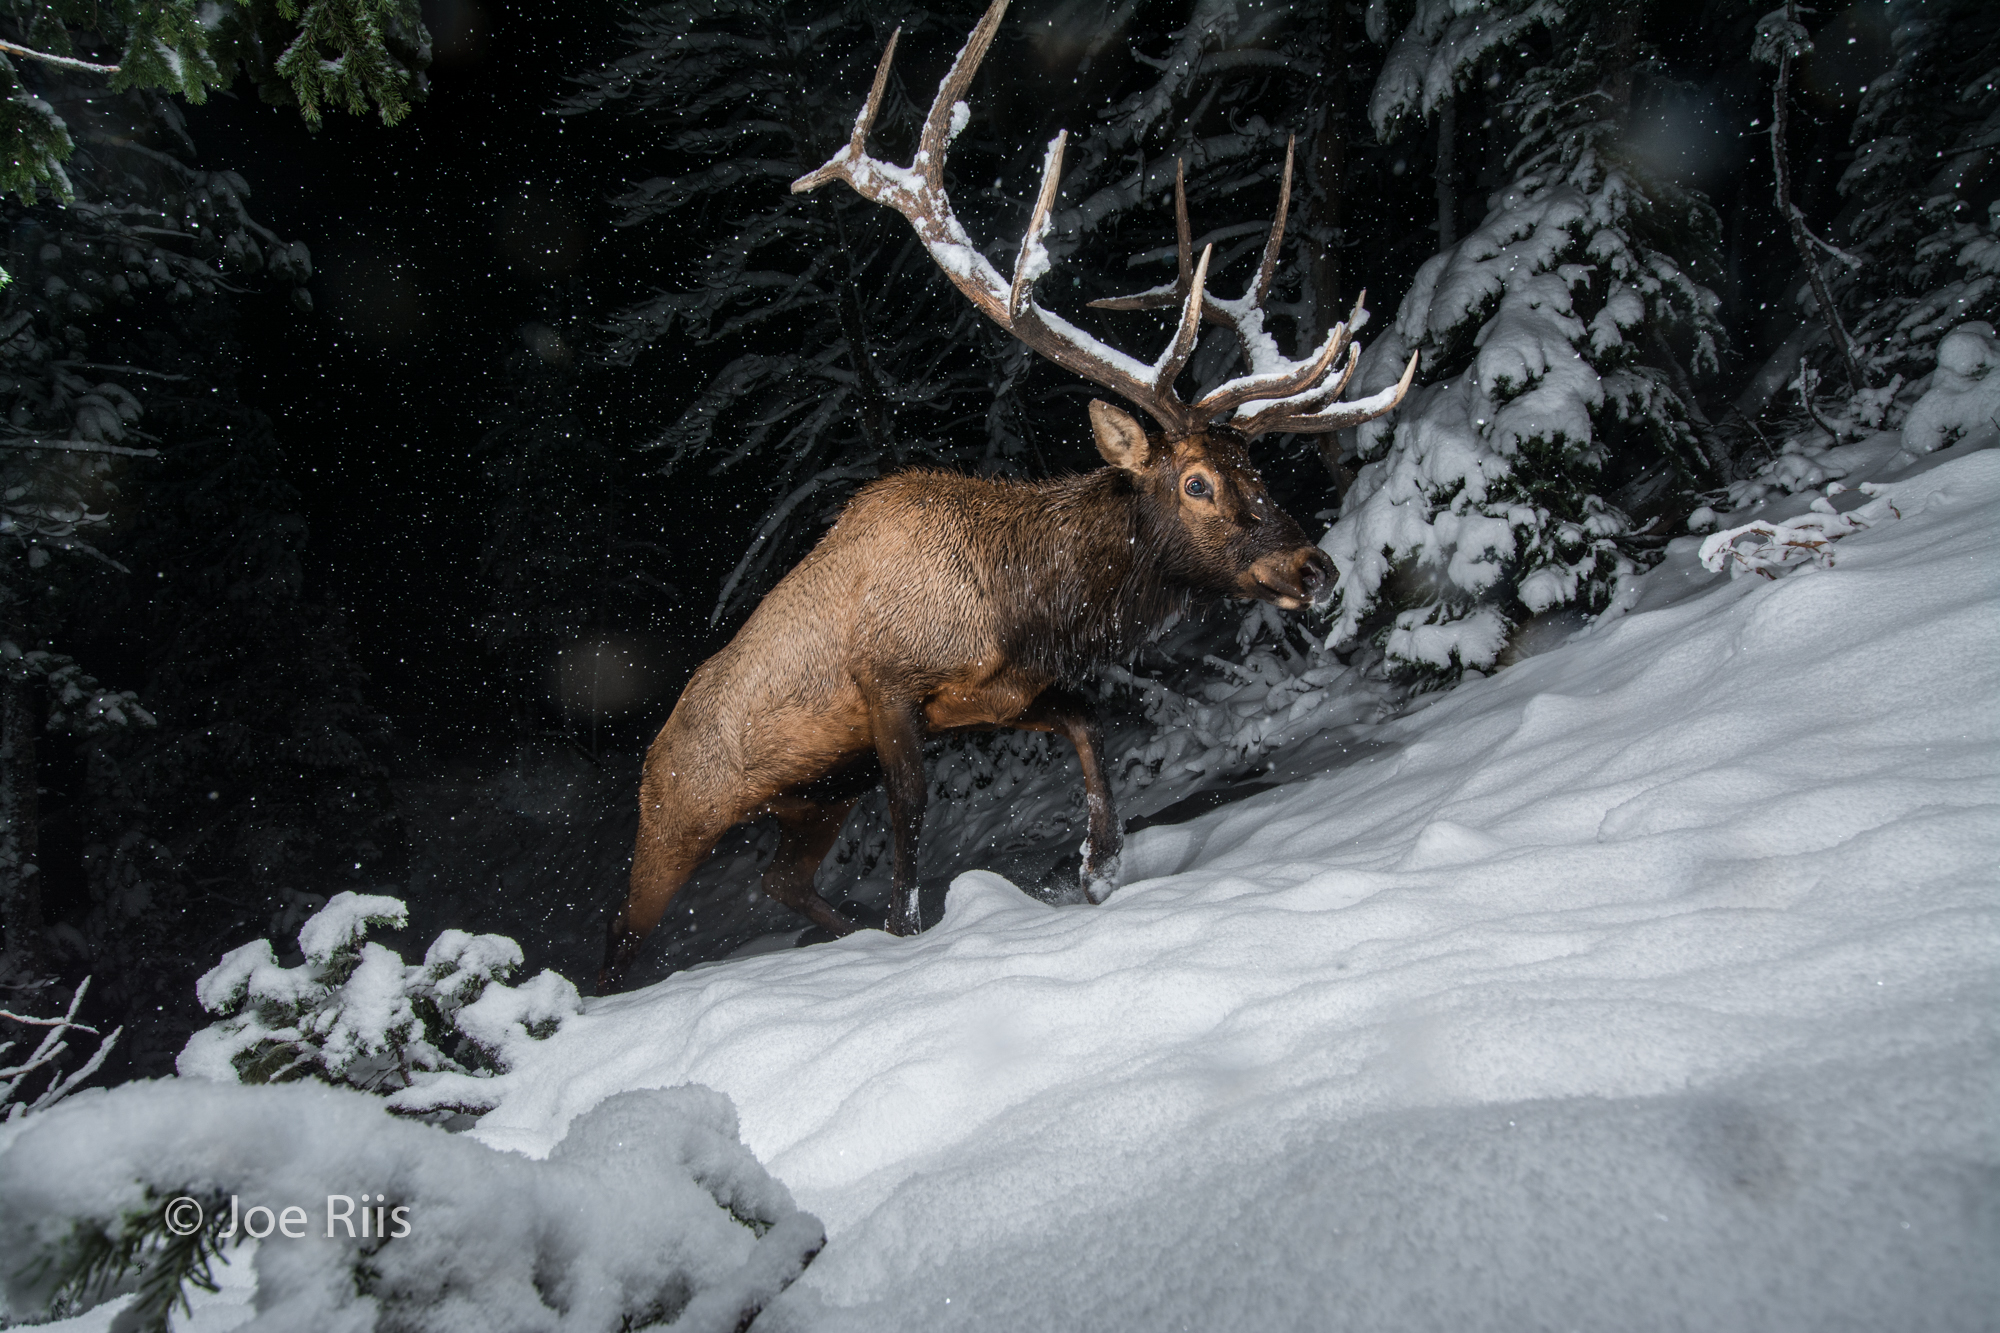  With stout, muscular bodies and durable hooves, elk are built to migrate.&nbsp;  The bull elk above was photographed moving through Eagle Pass, on the south boundary of Yellowstone National Park, on October 1, as fall turned to winter. 